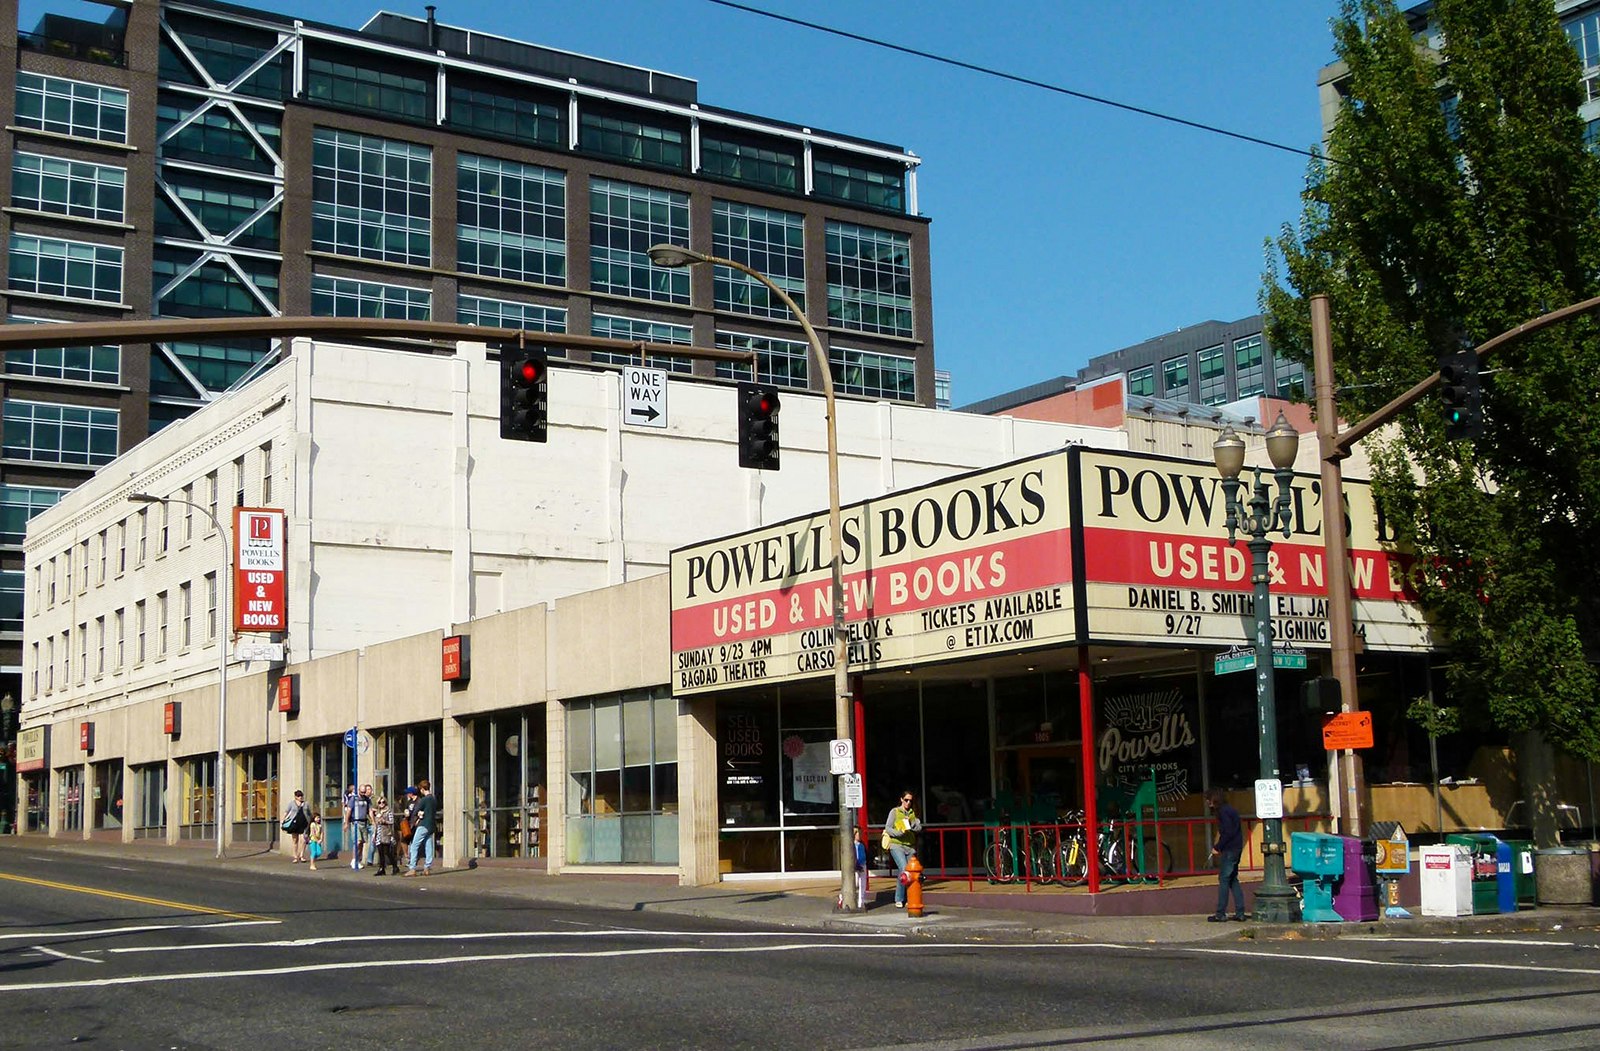 exterior view of Powell's books in Portland, a single-story bookstore